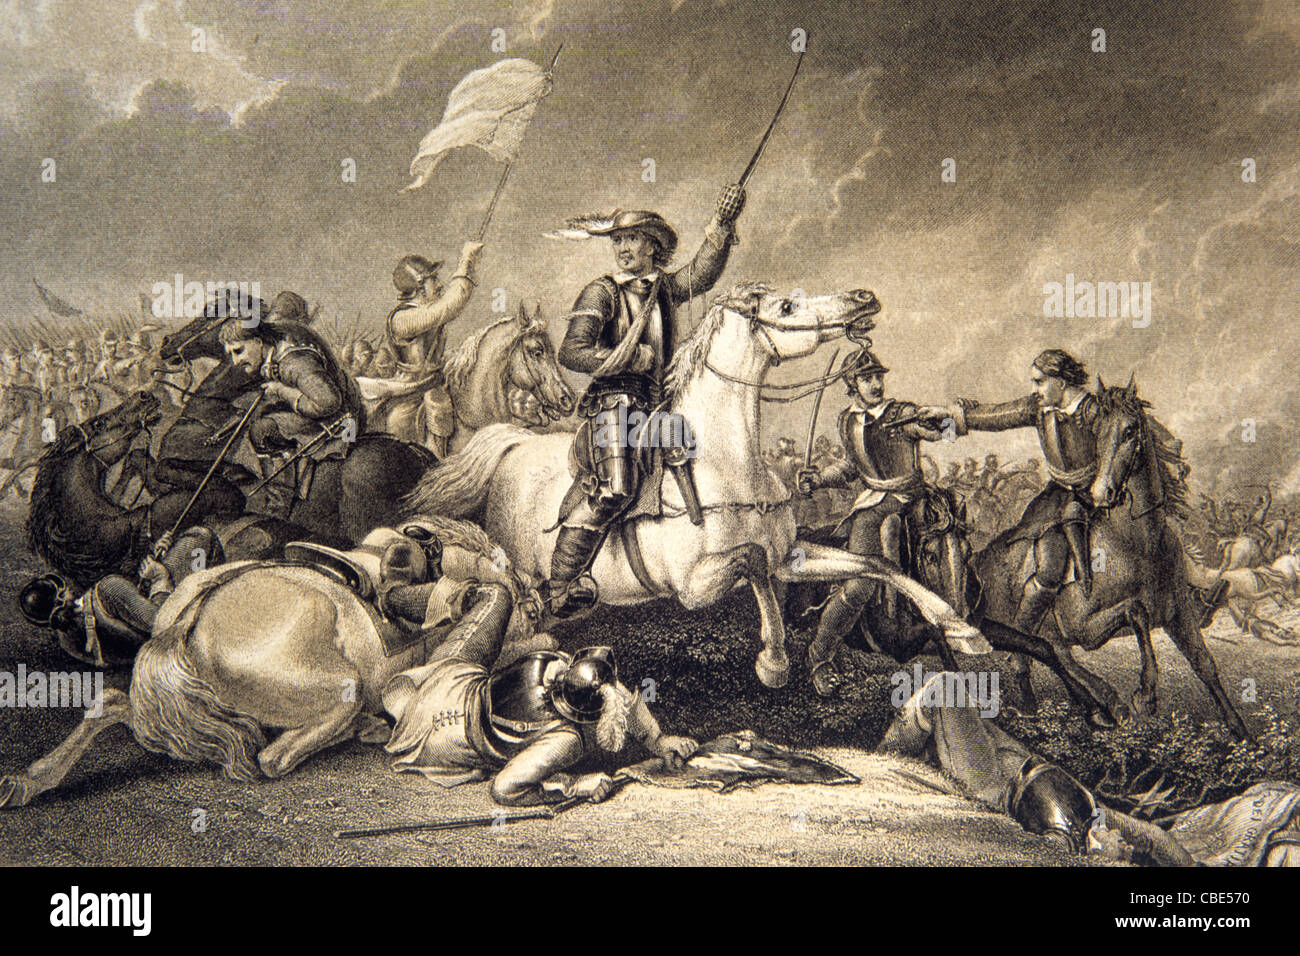 Oliver Cromwell at the English Civil War Battle of Marston Moor (1644) c19th Engraving After Painting by Abraham Cooper. Vintage Illustration or Engraving Stock Photo